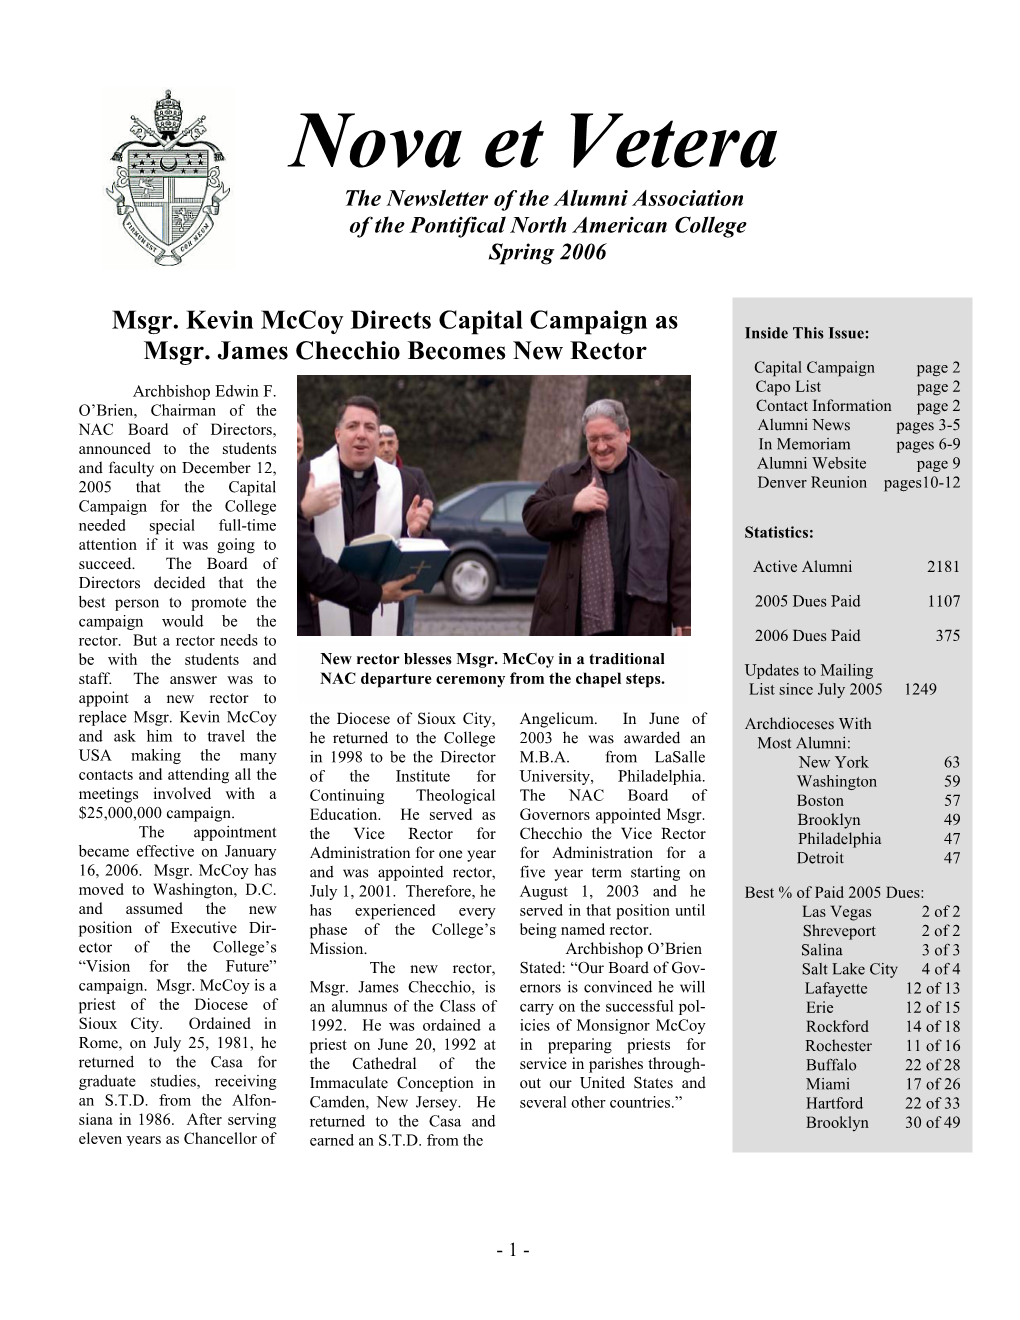 Nova Et Vetera the Newsletter of the Alumni Association of the Pontifical North American College Spring 2006